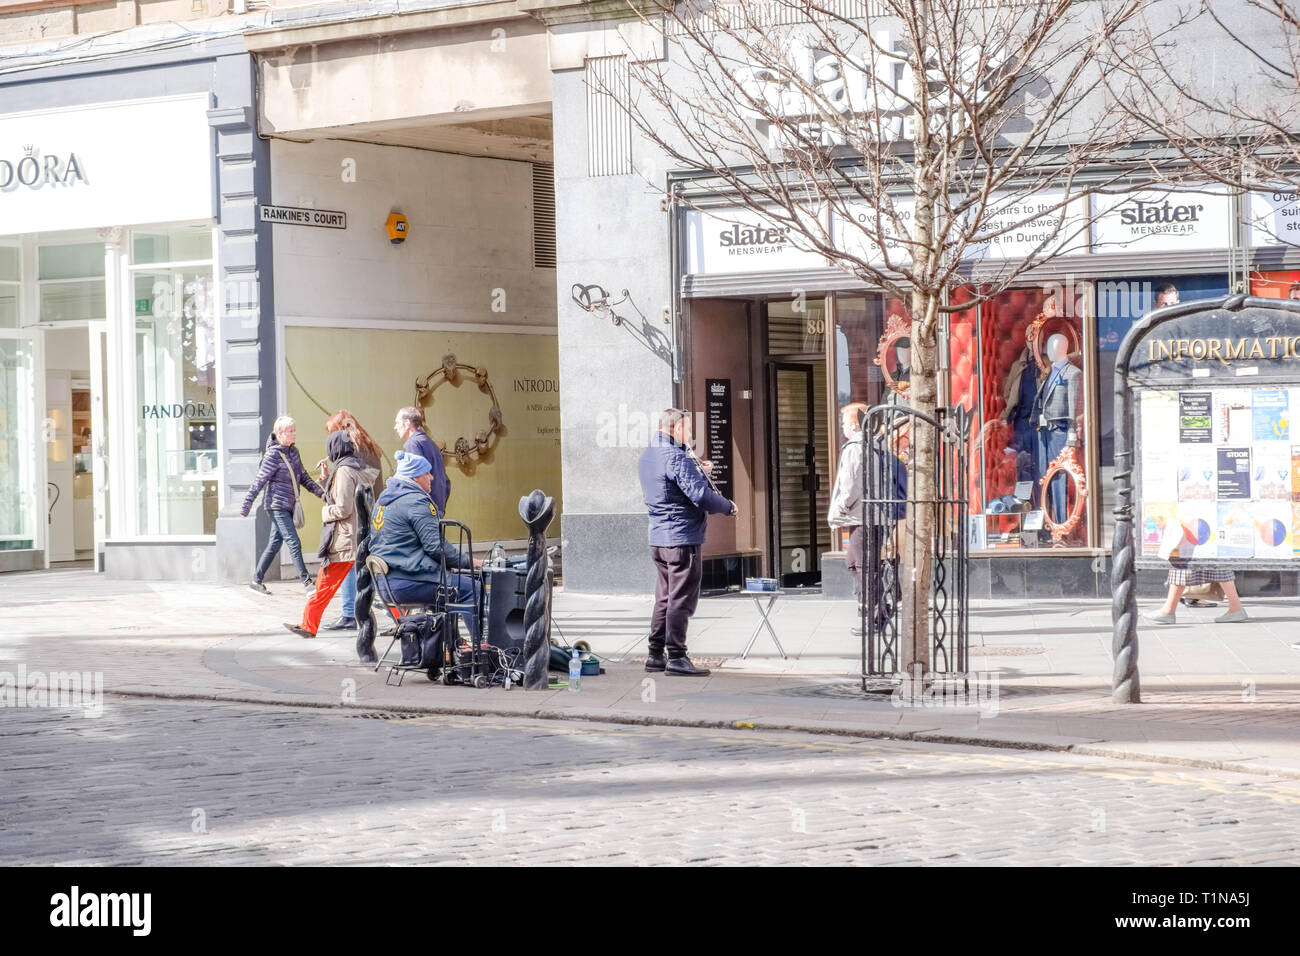 Dundee, Scotland, UK - March 23, 2019: People busy shopping and some street entertainers  in  in the City Centre of Dundee in Scotland. Stock Photo